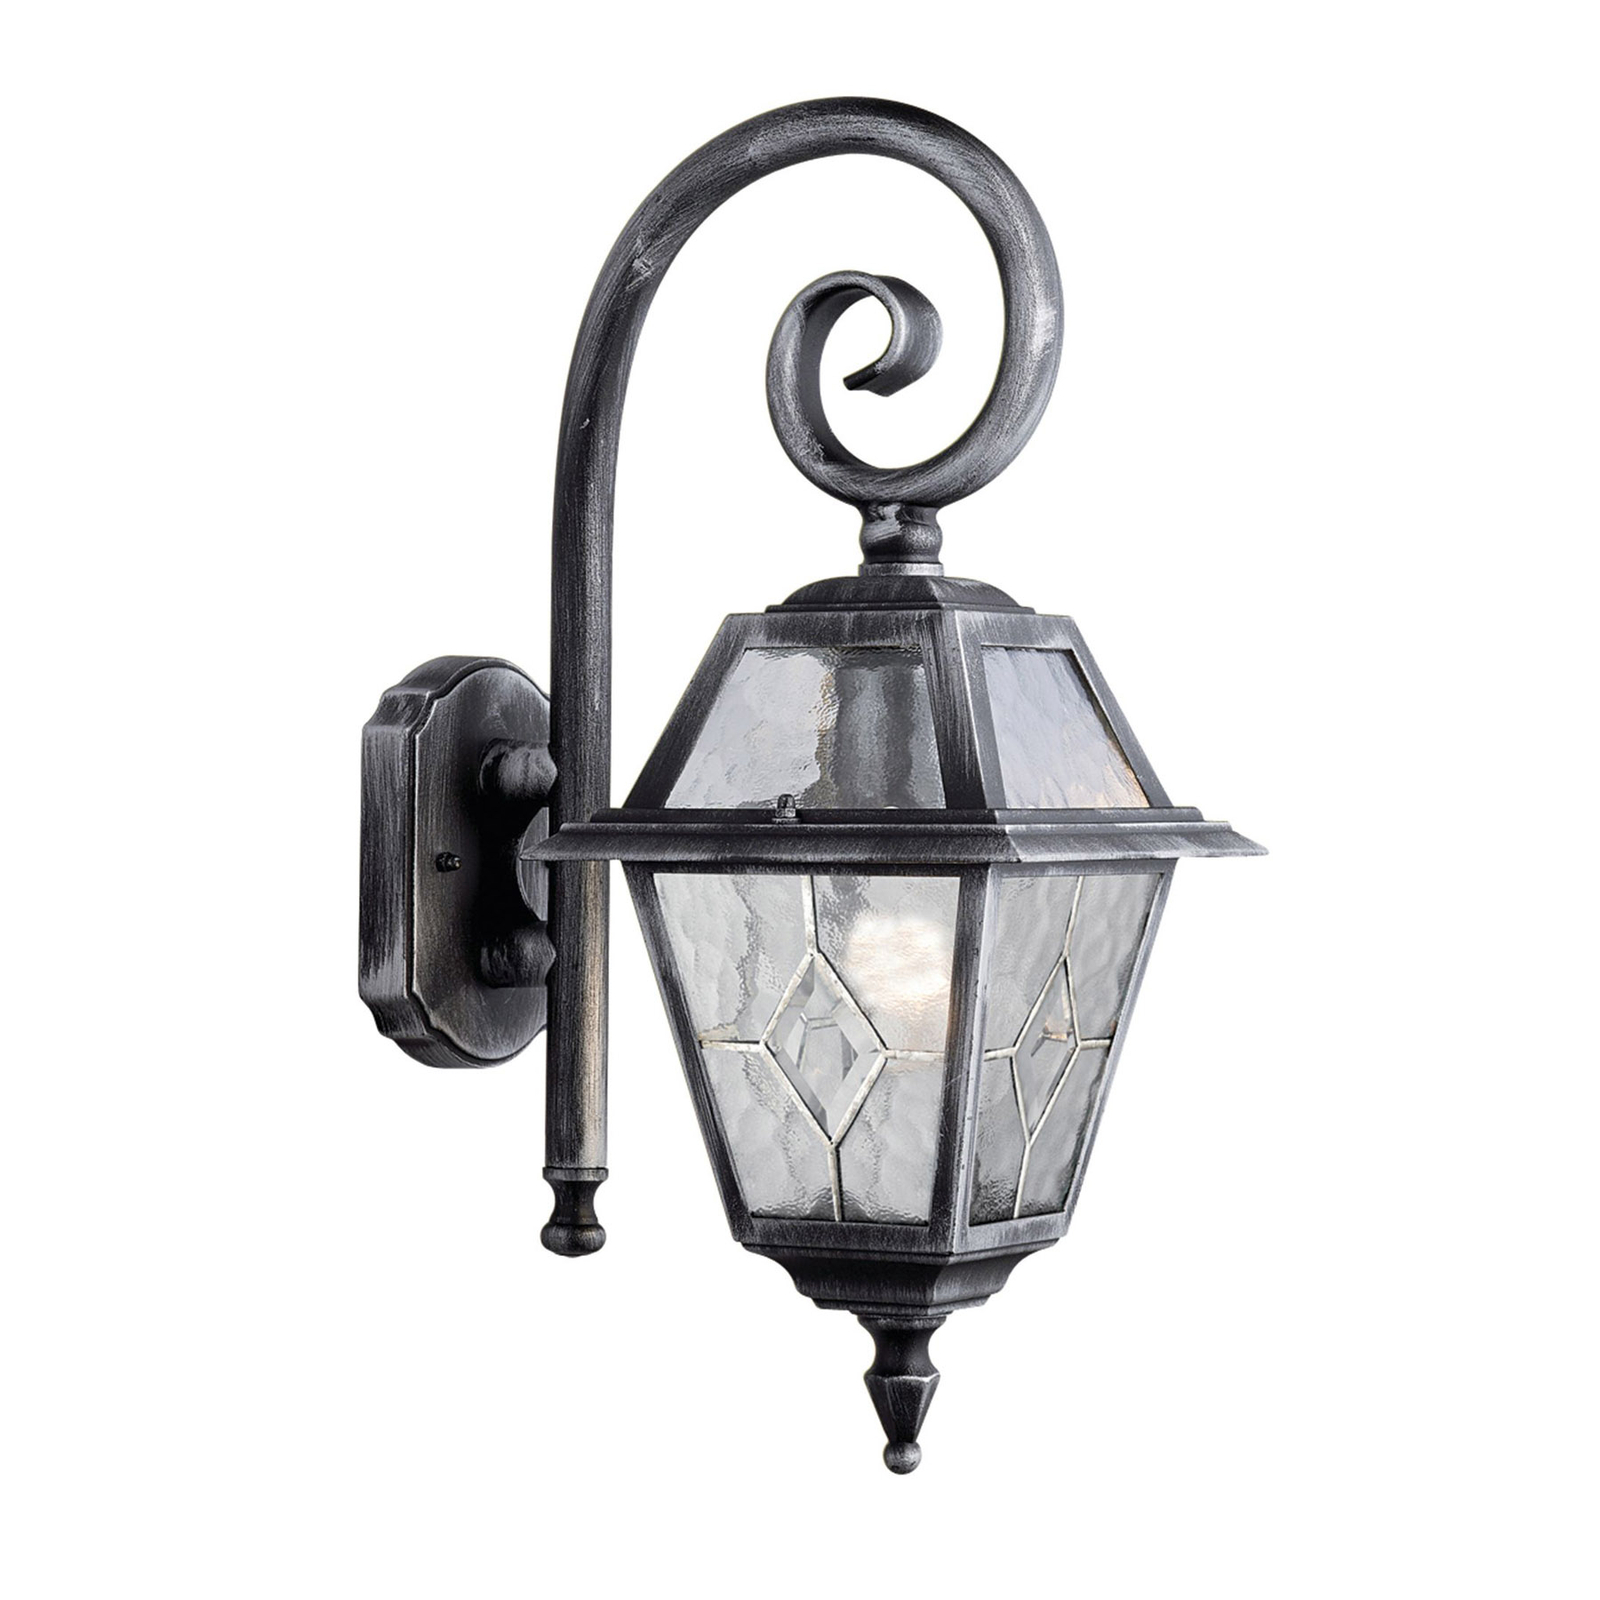 Genoa outdoor wall lamp with lead glass, IP44